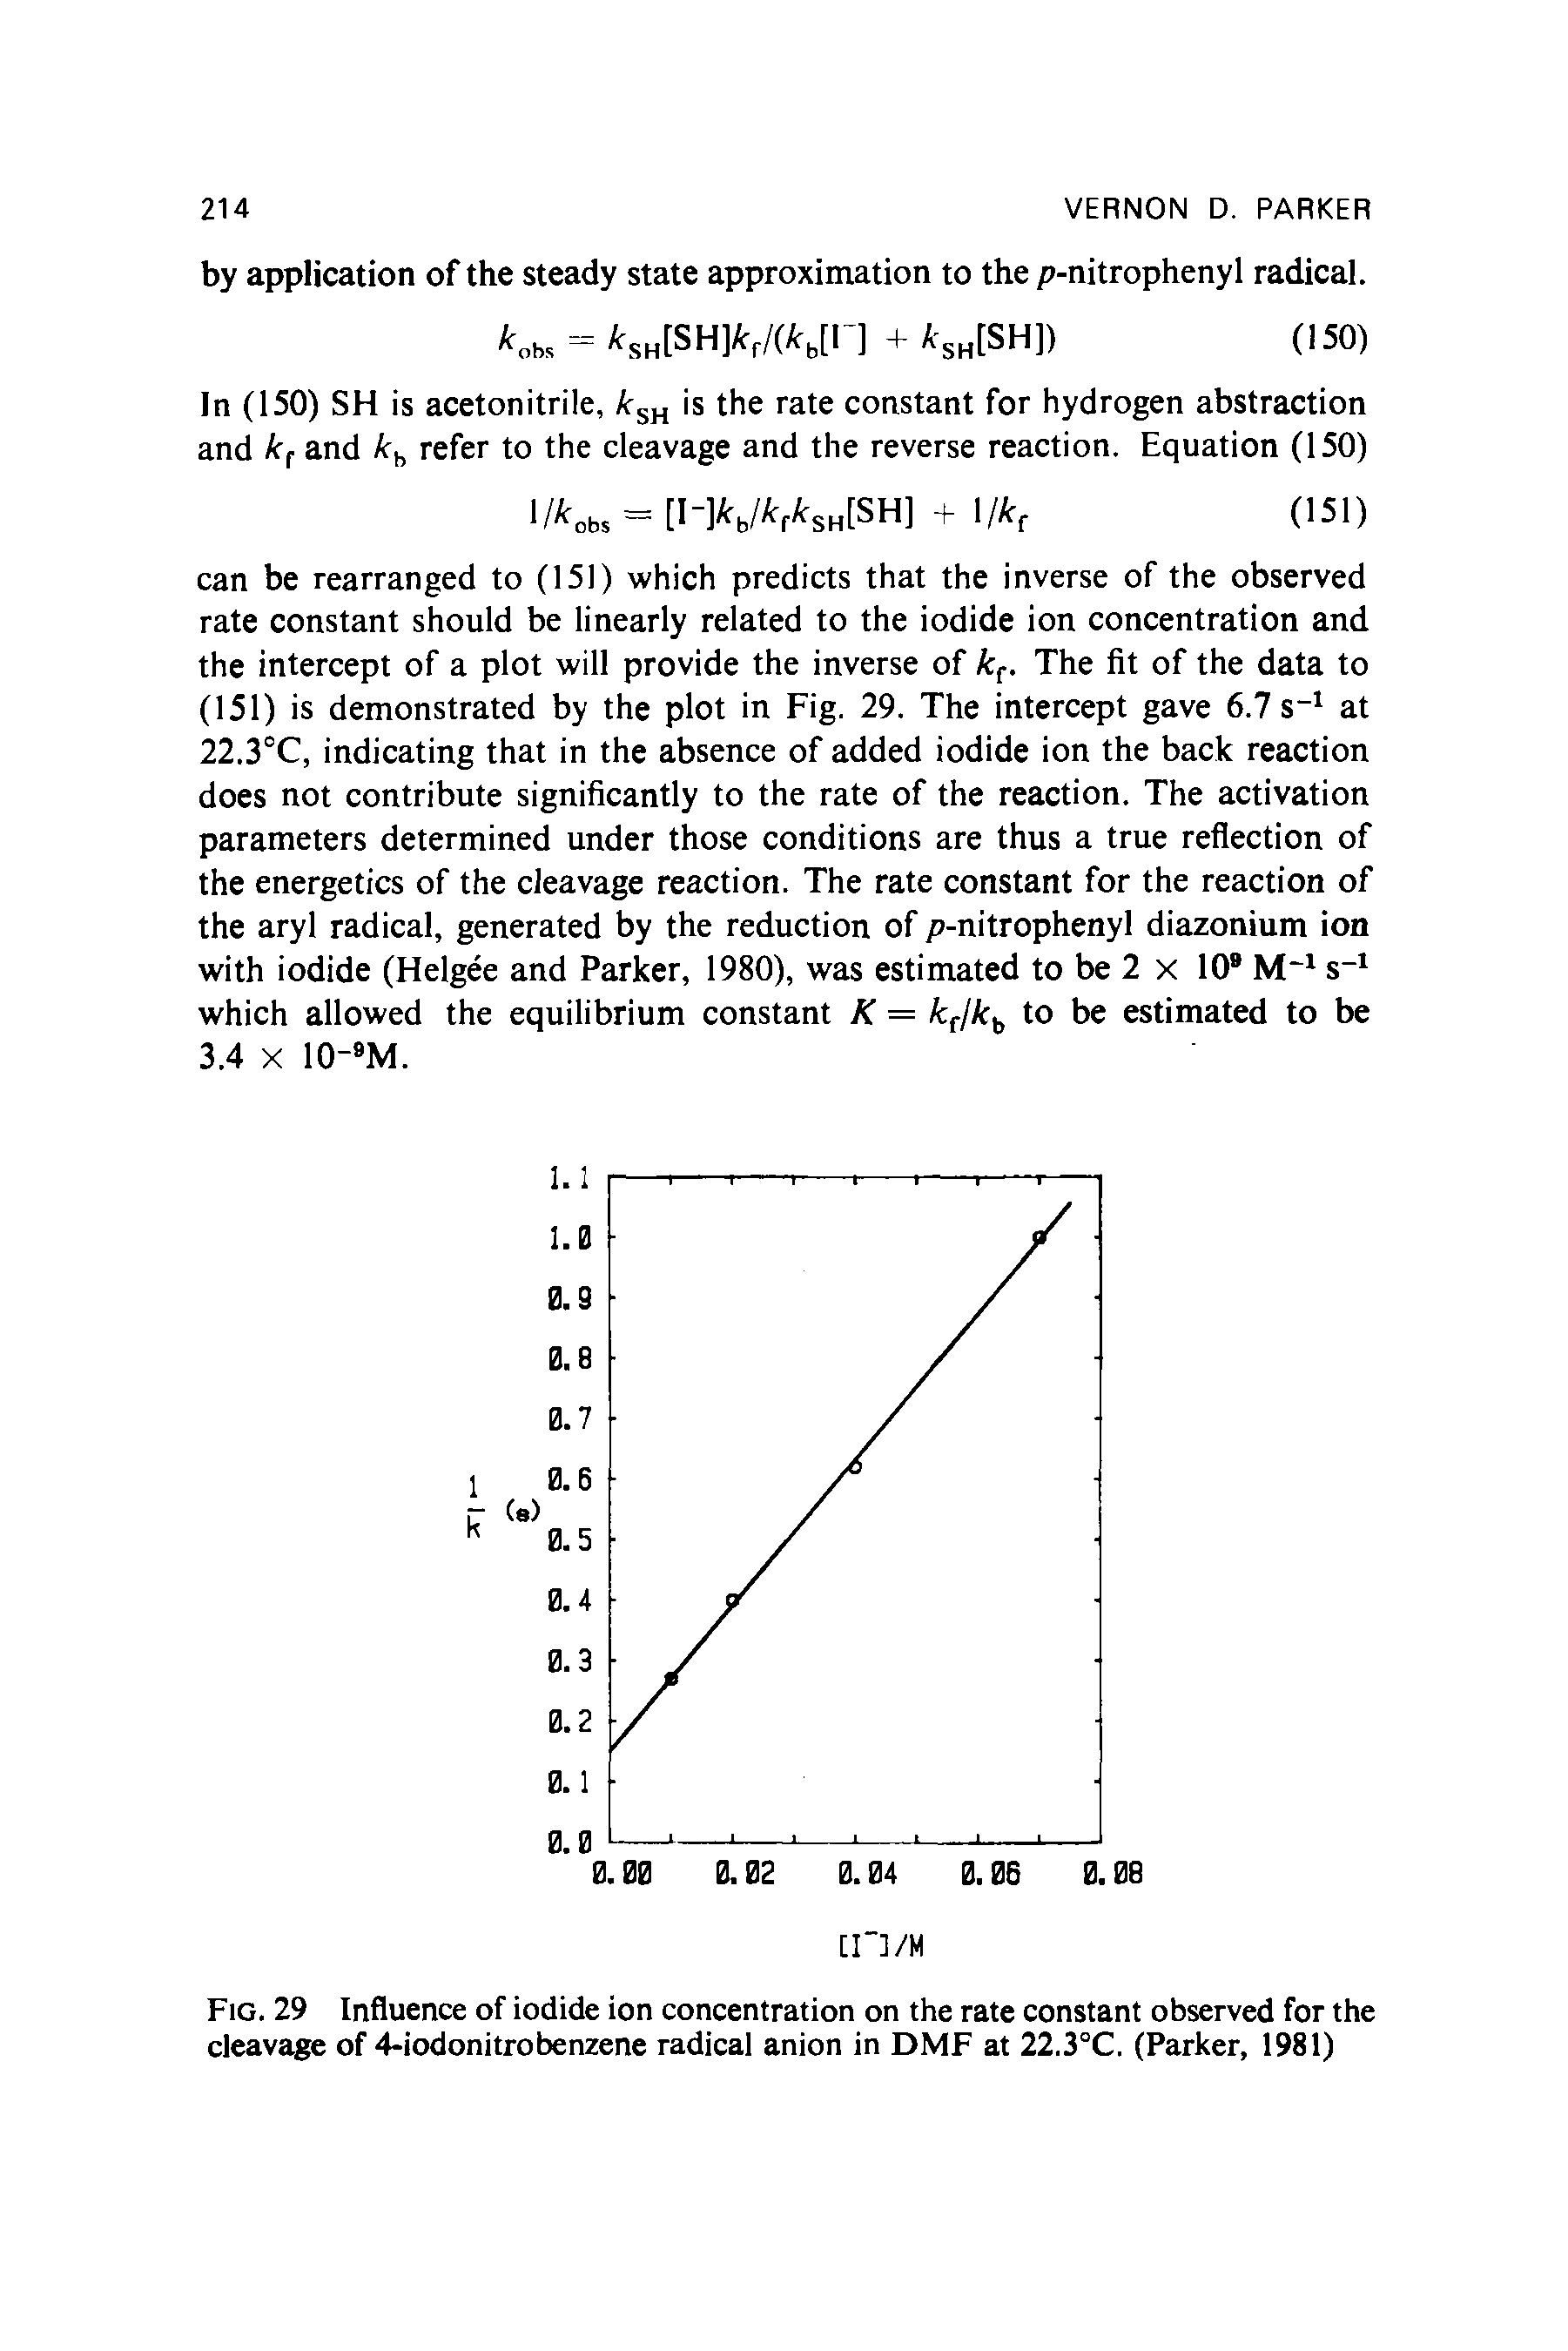 Fig. 29 Influence of iodide ion concentration on the rate constant observed for the cleavage of 4-iodonitrobenzene radical anion in DMF at 22.3°C. (Parker, 1981)...